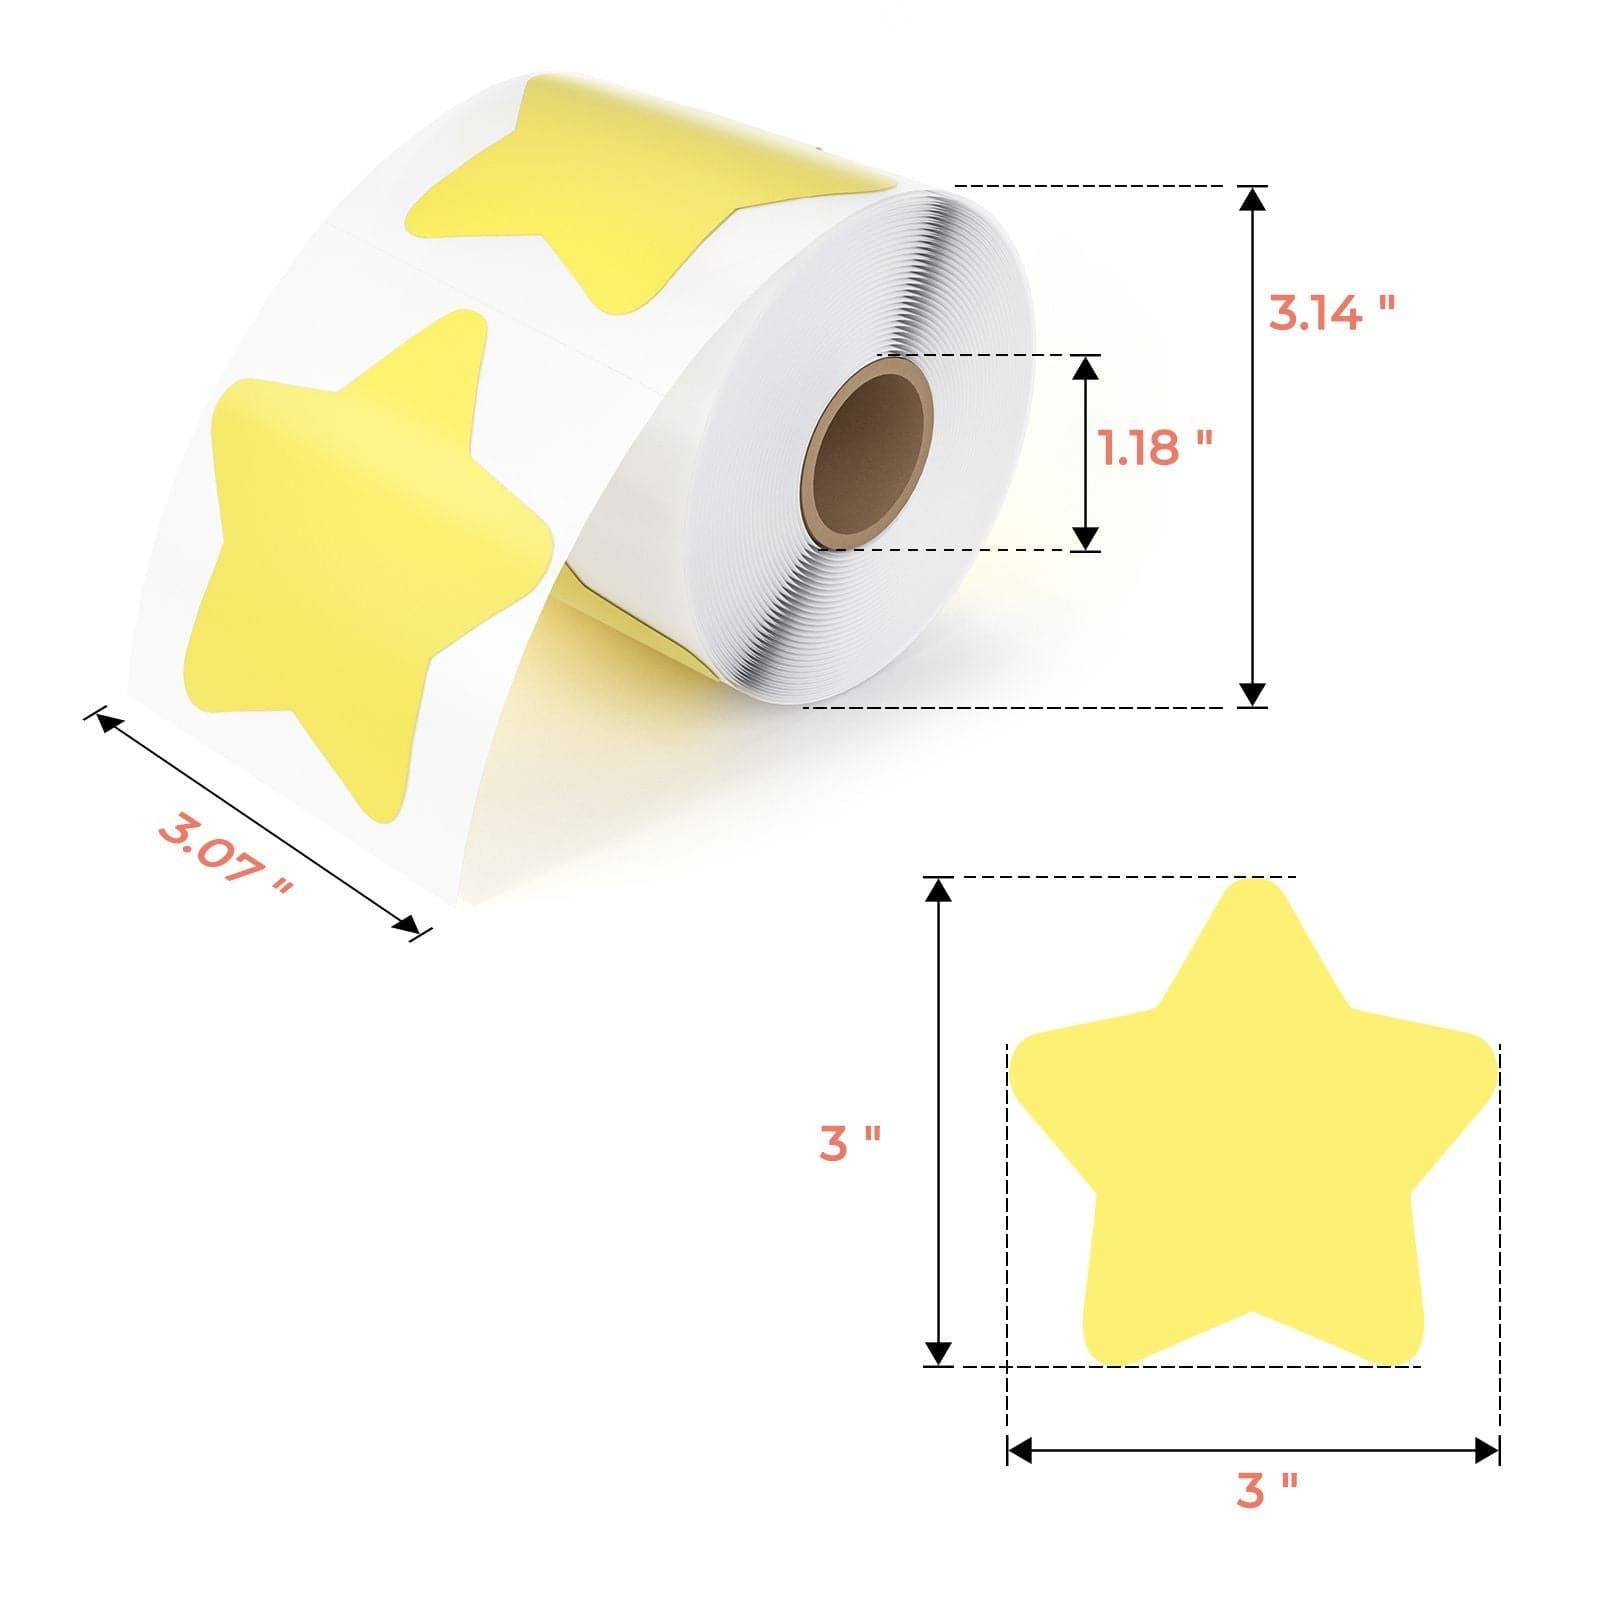 MUNBYN star-shaped thermal labels are three inches long and wide.